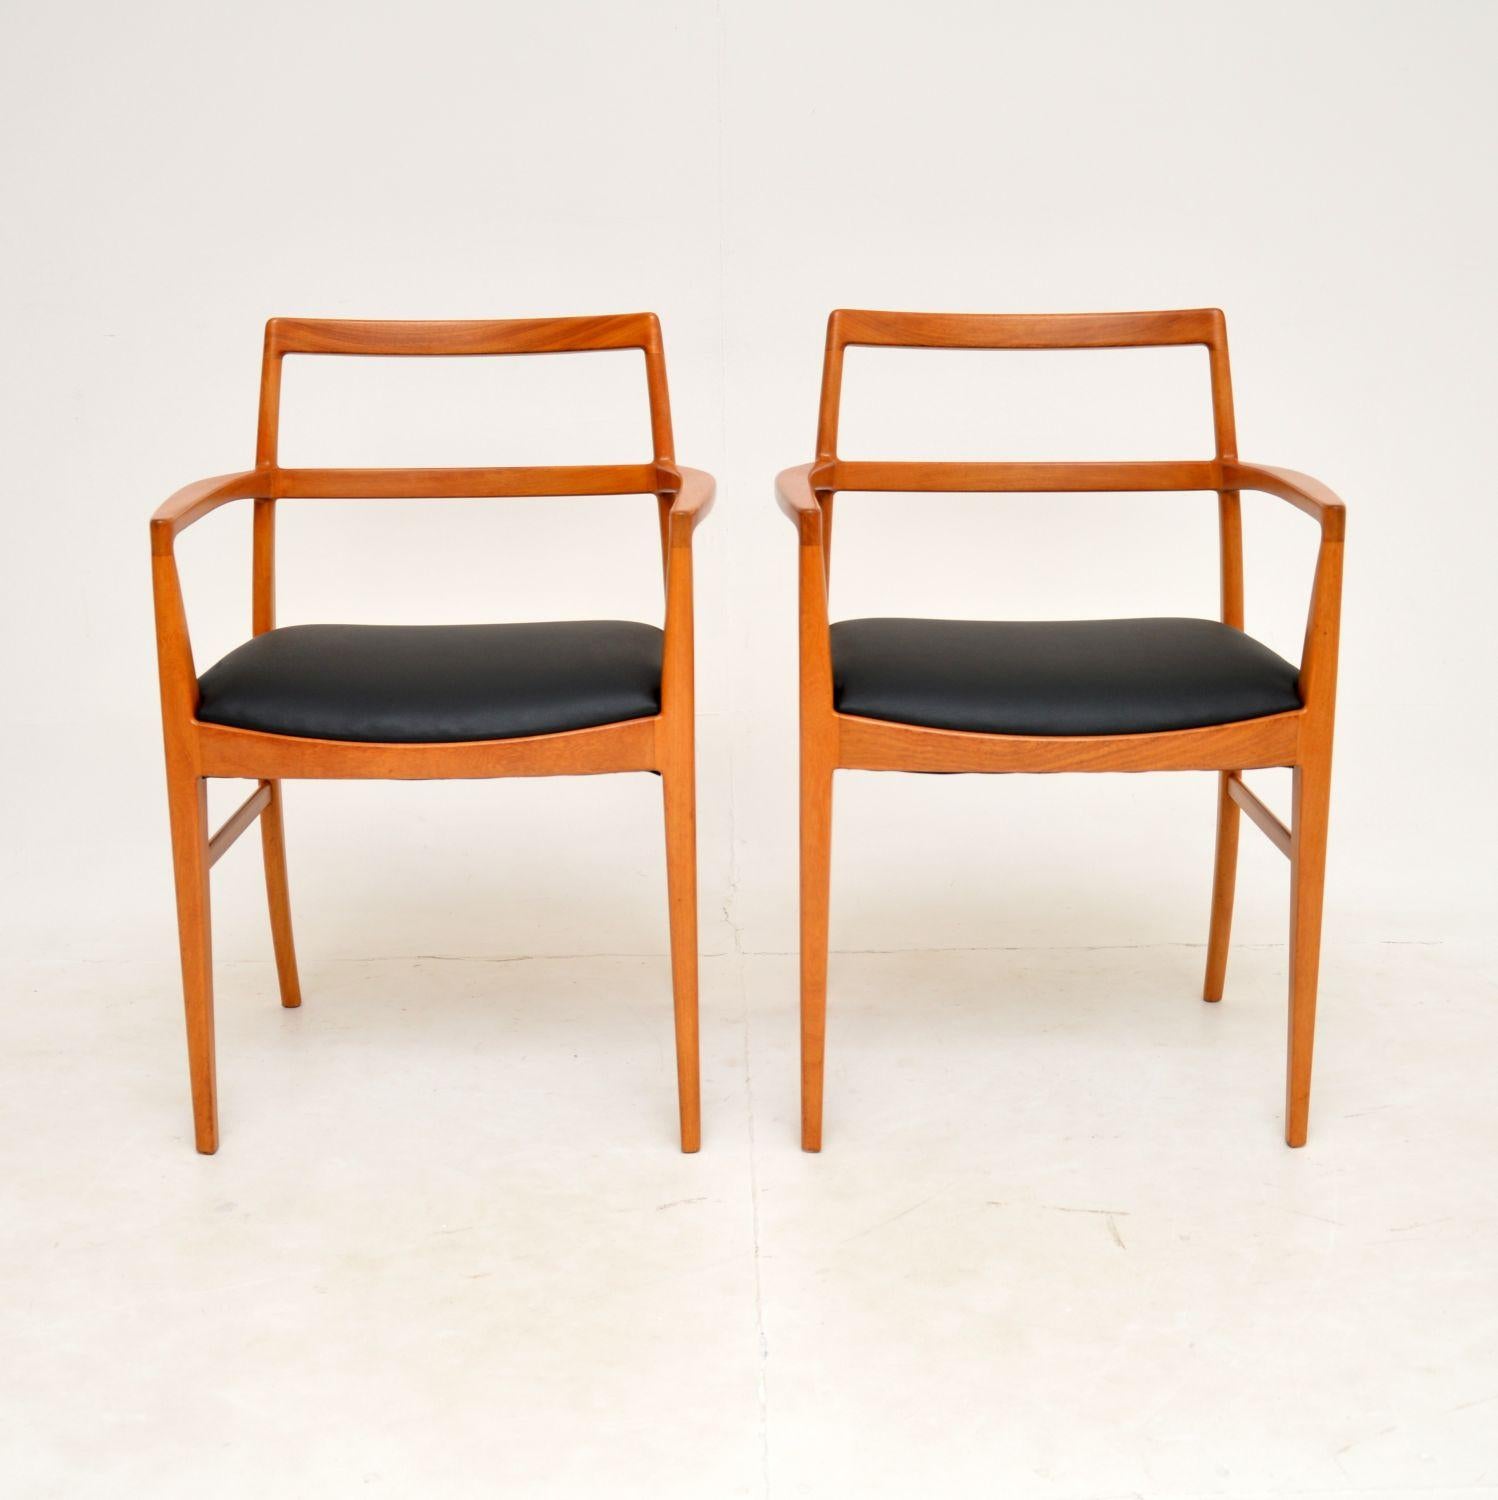 A beautiful and extremely well made pair of vintage Danish carver armchairs. They were designed by Arne Vodder for Sibast, and they date from the 1960’s.

This model is very rare, especially in this wood. It’s hard to be sure, but we believe they